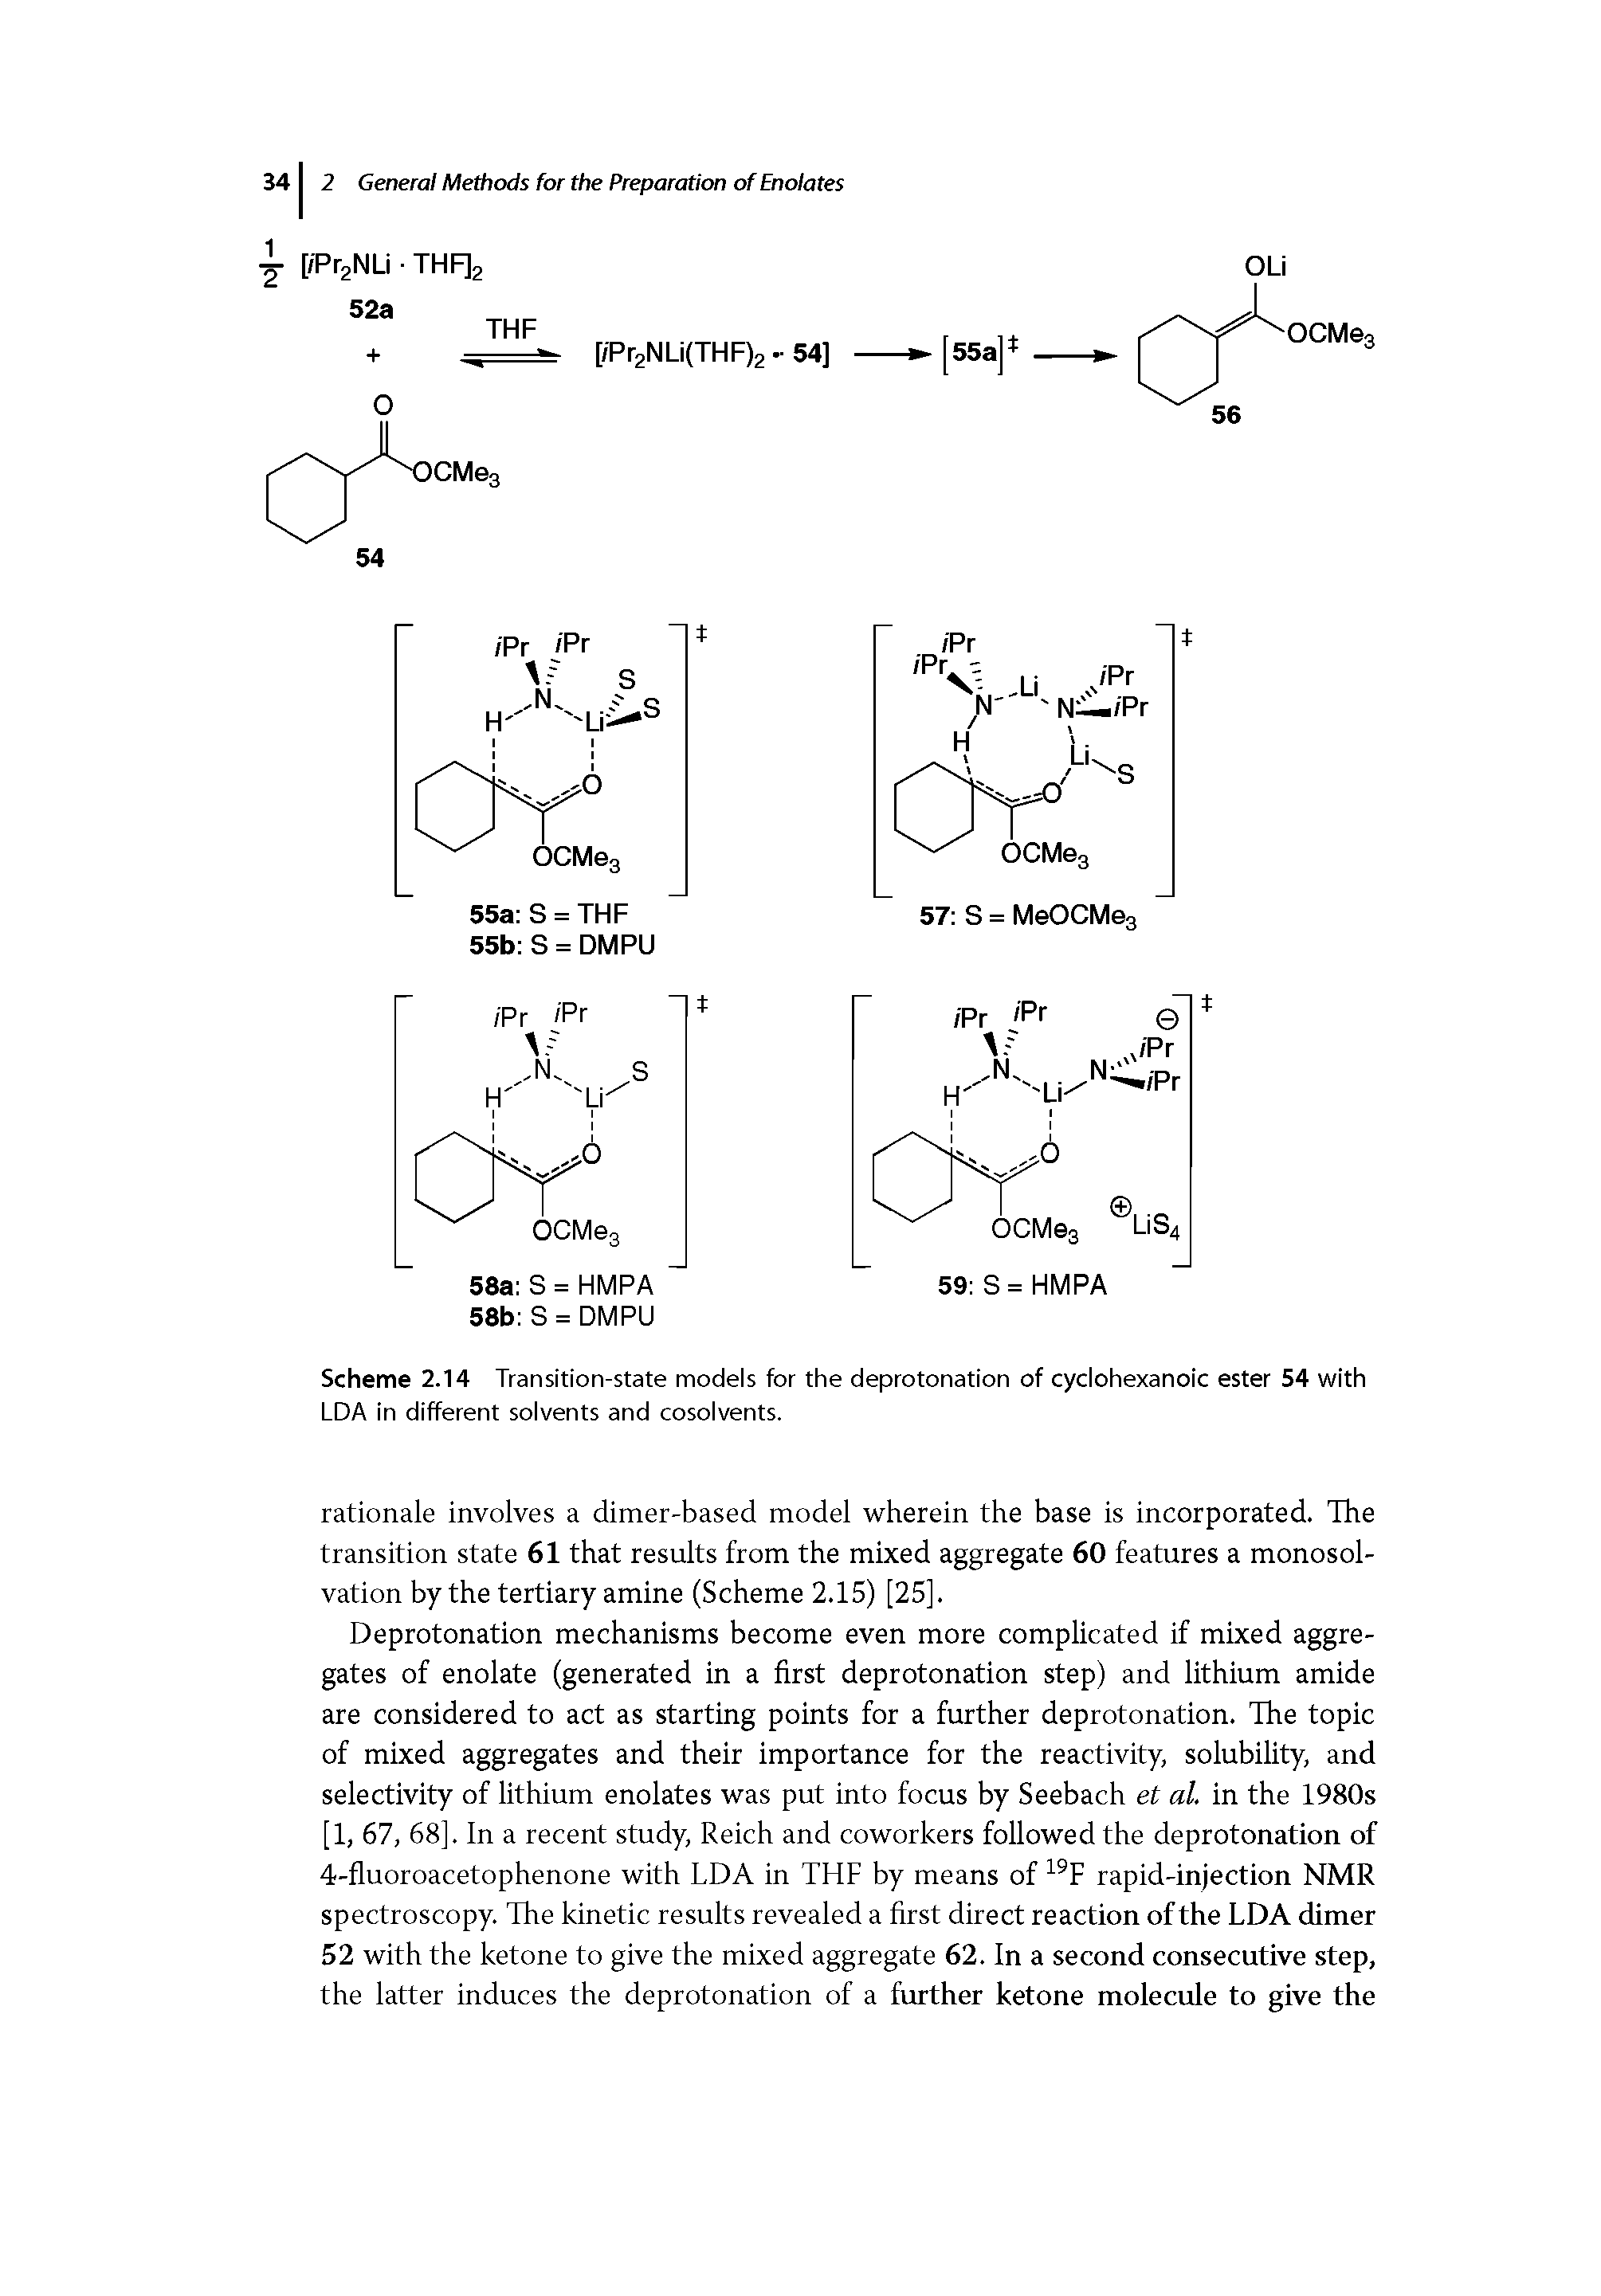 Scheme 2.14 Transition-state models for the deprotonation of cyclohexanoic ester 54 with LDA in different solvents and cosolvents.